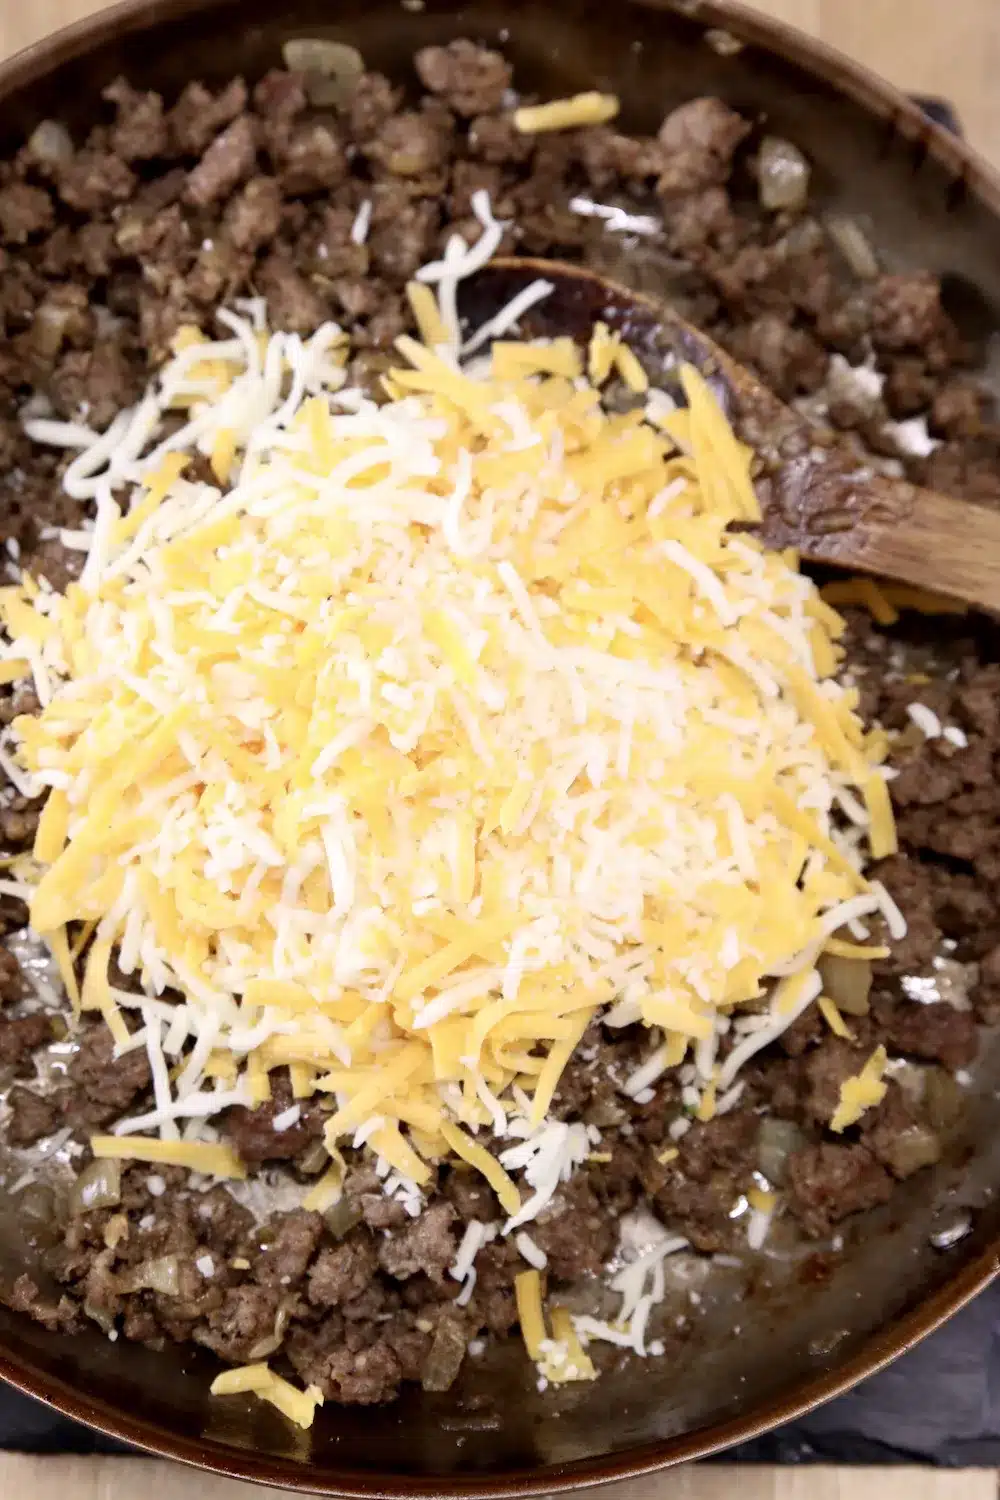 Skillet with browned sausage and grated cheese.